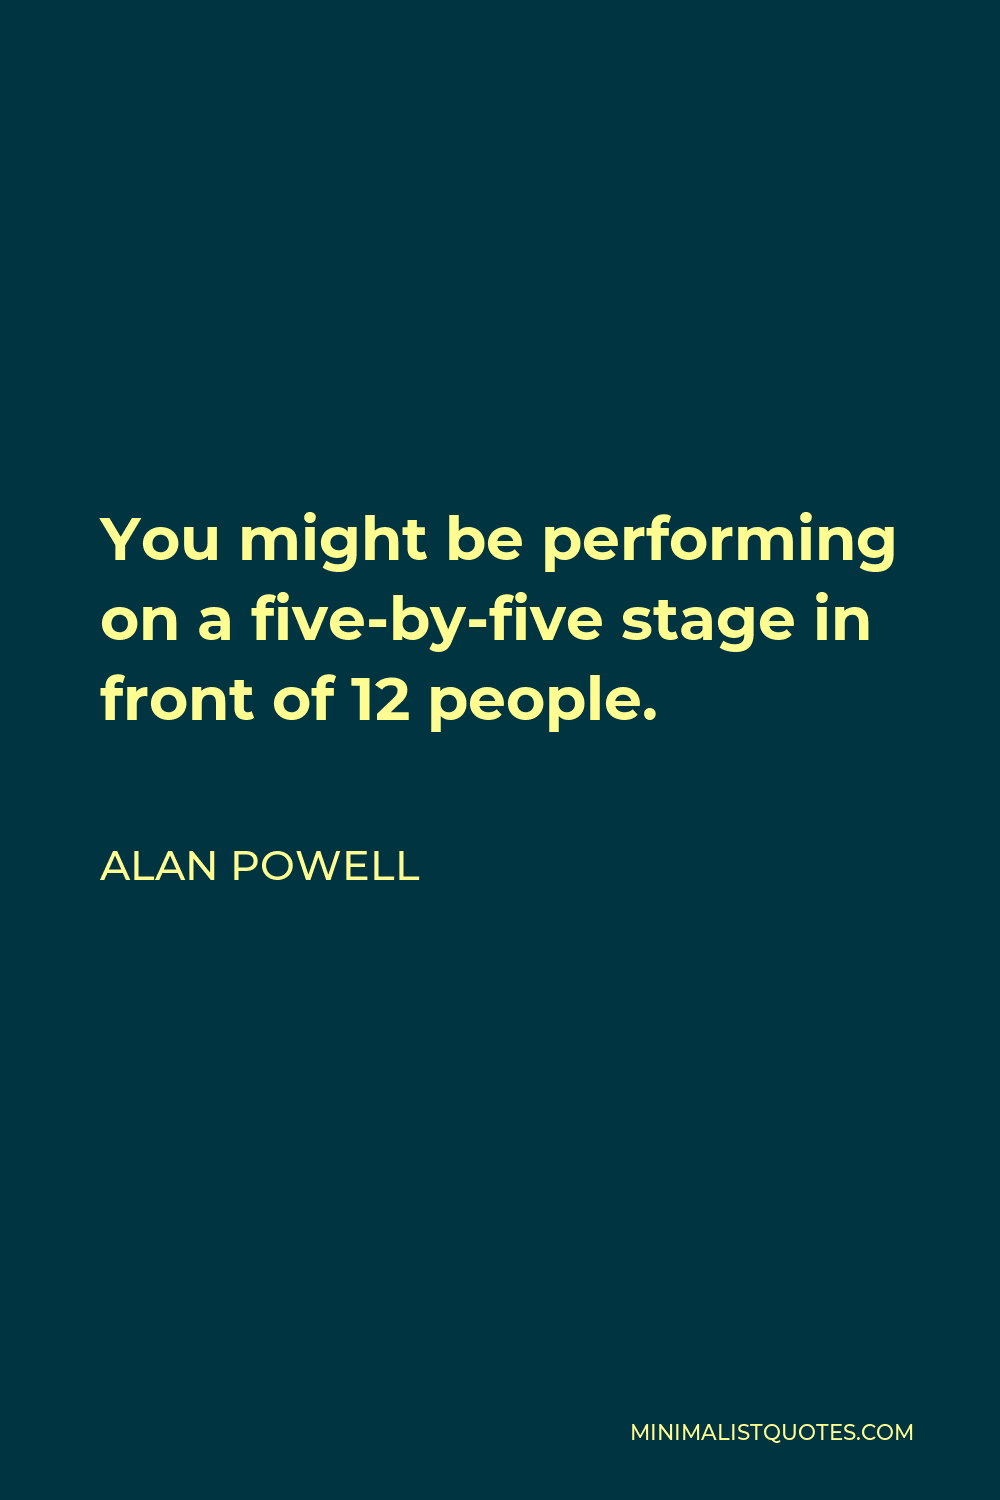 Alan Powell Quote - You might be performing on a five-by-five stage in front of 12 people.